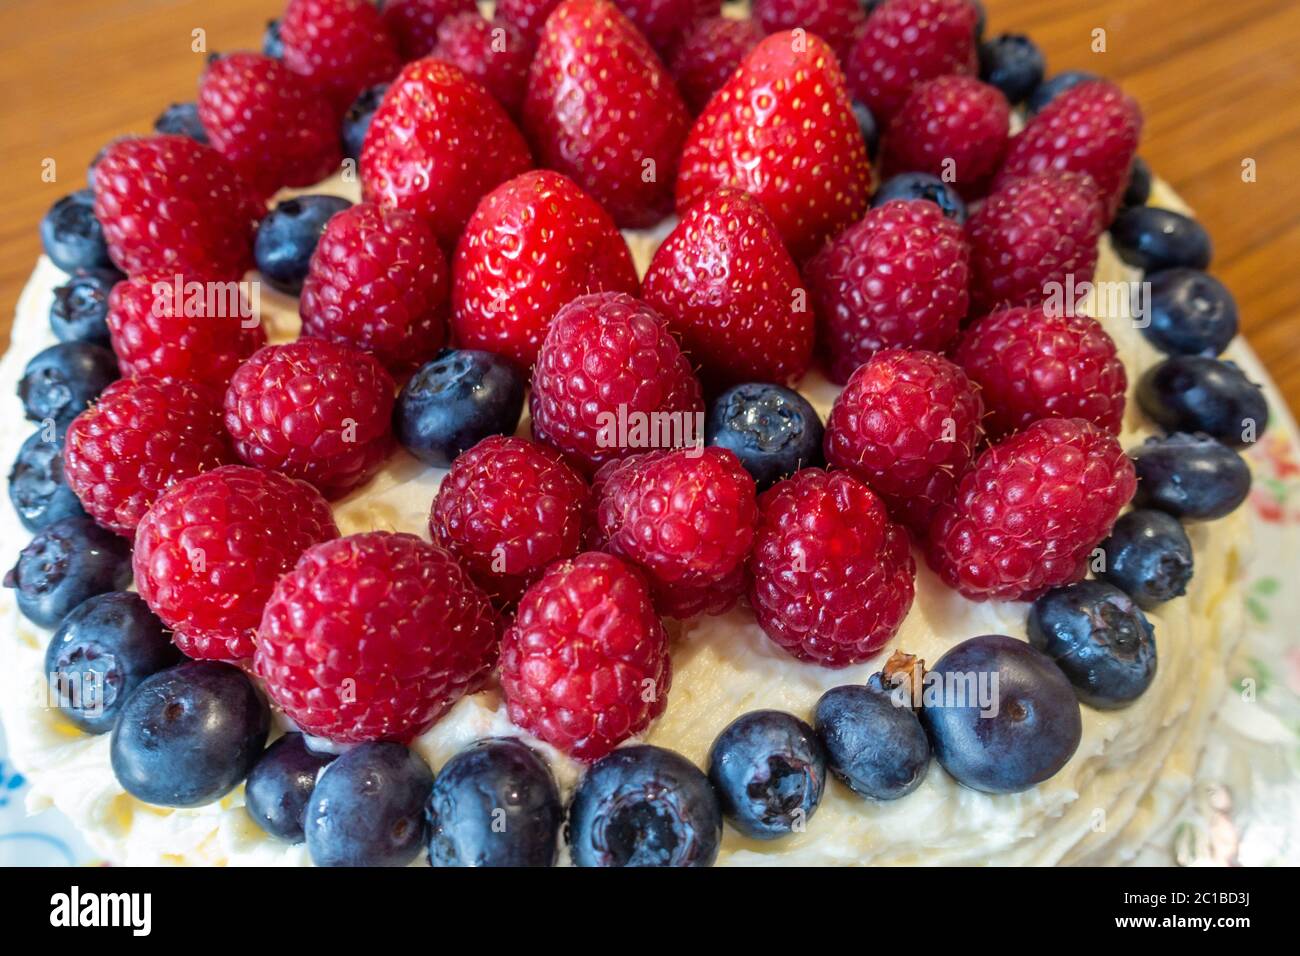 A cake decorated with butter icing and summer fruits including strawberries, raspberries and blueberries. Stock Photo